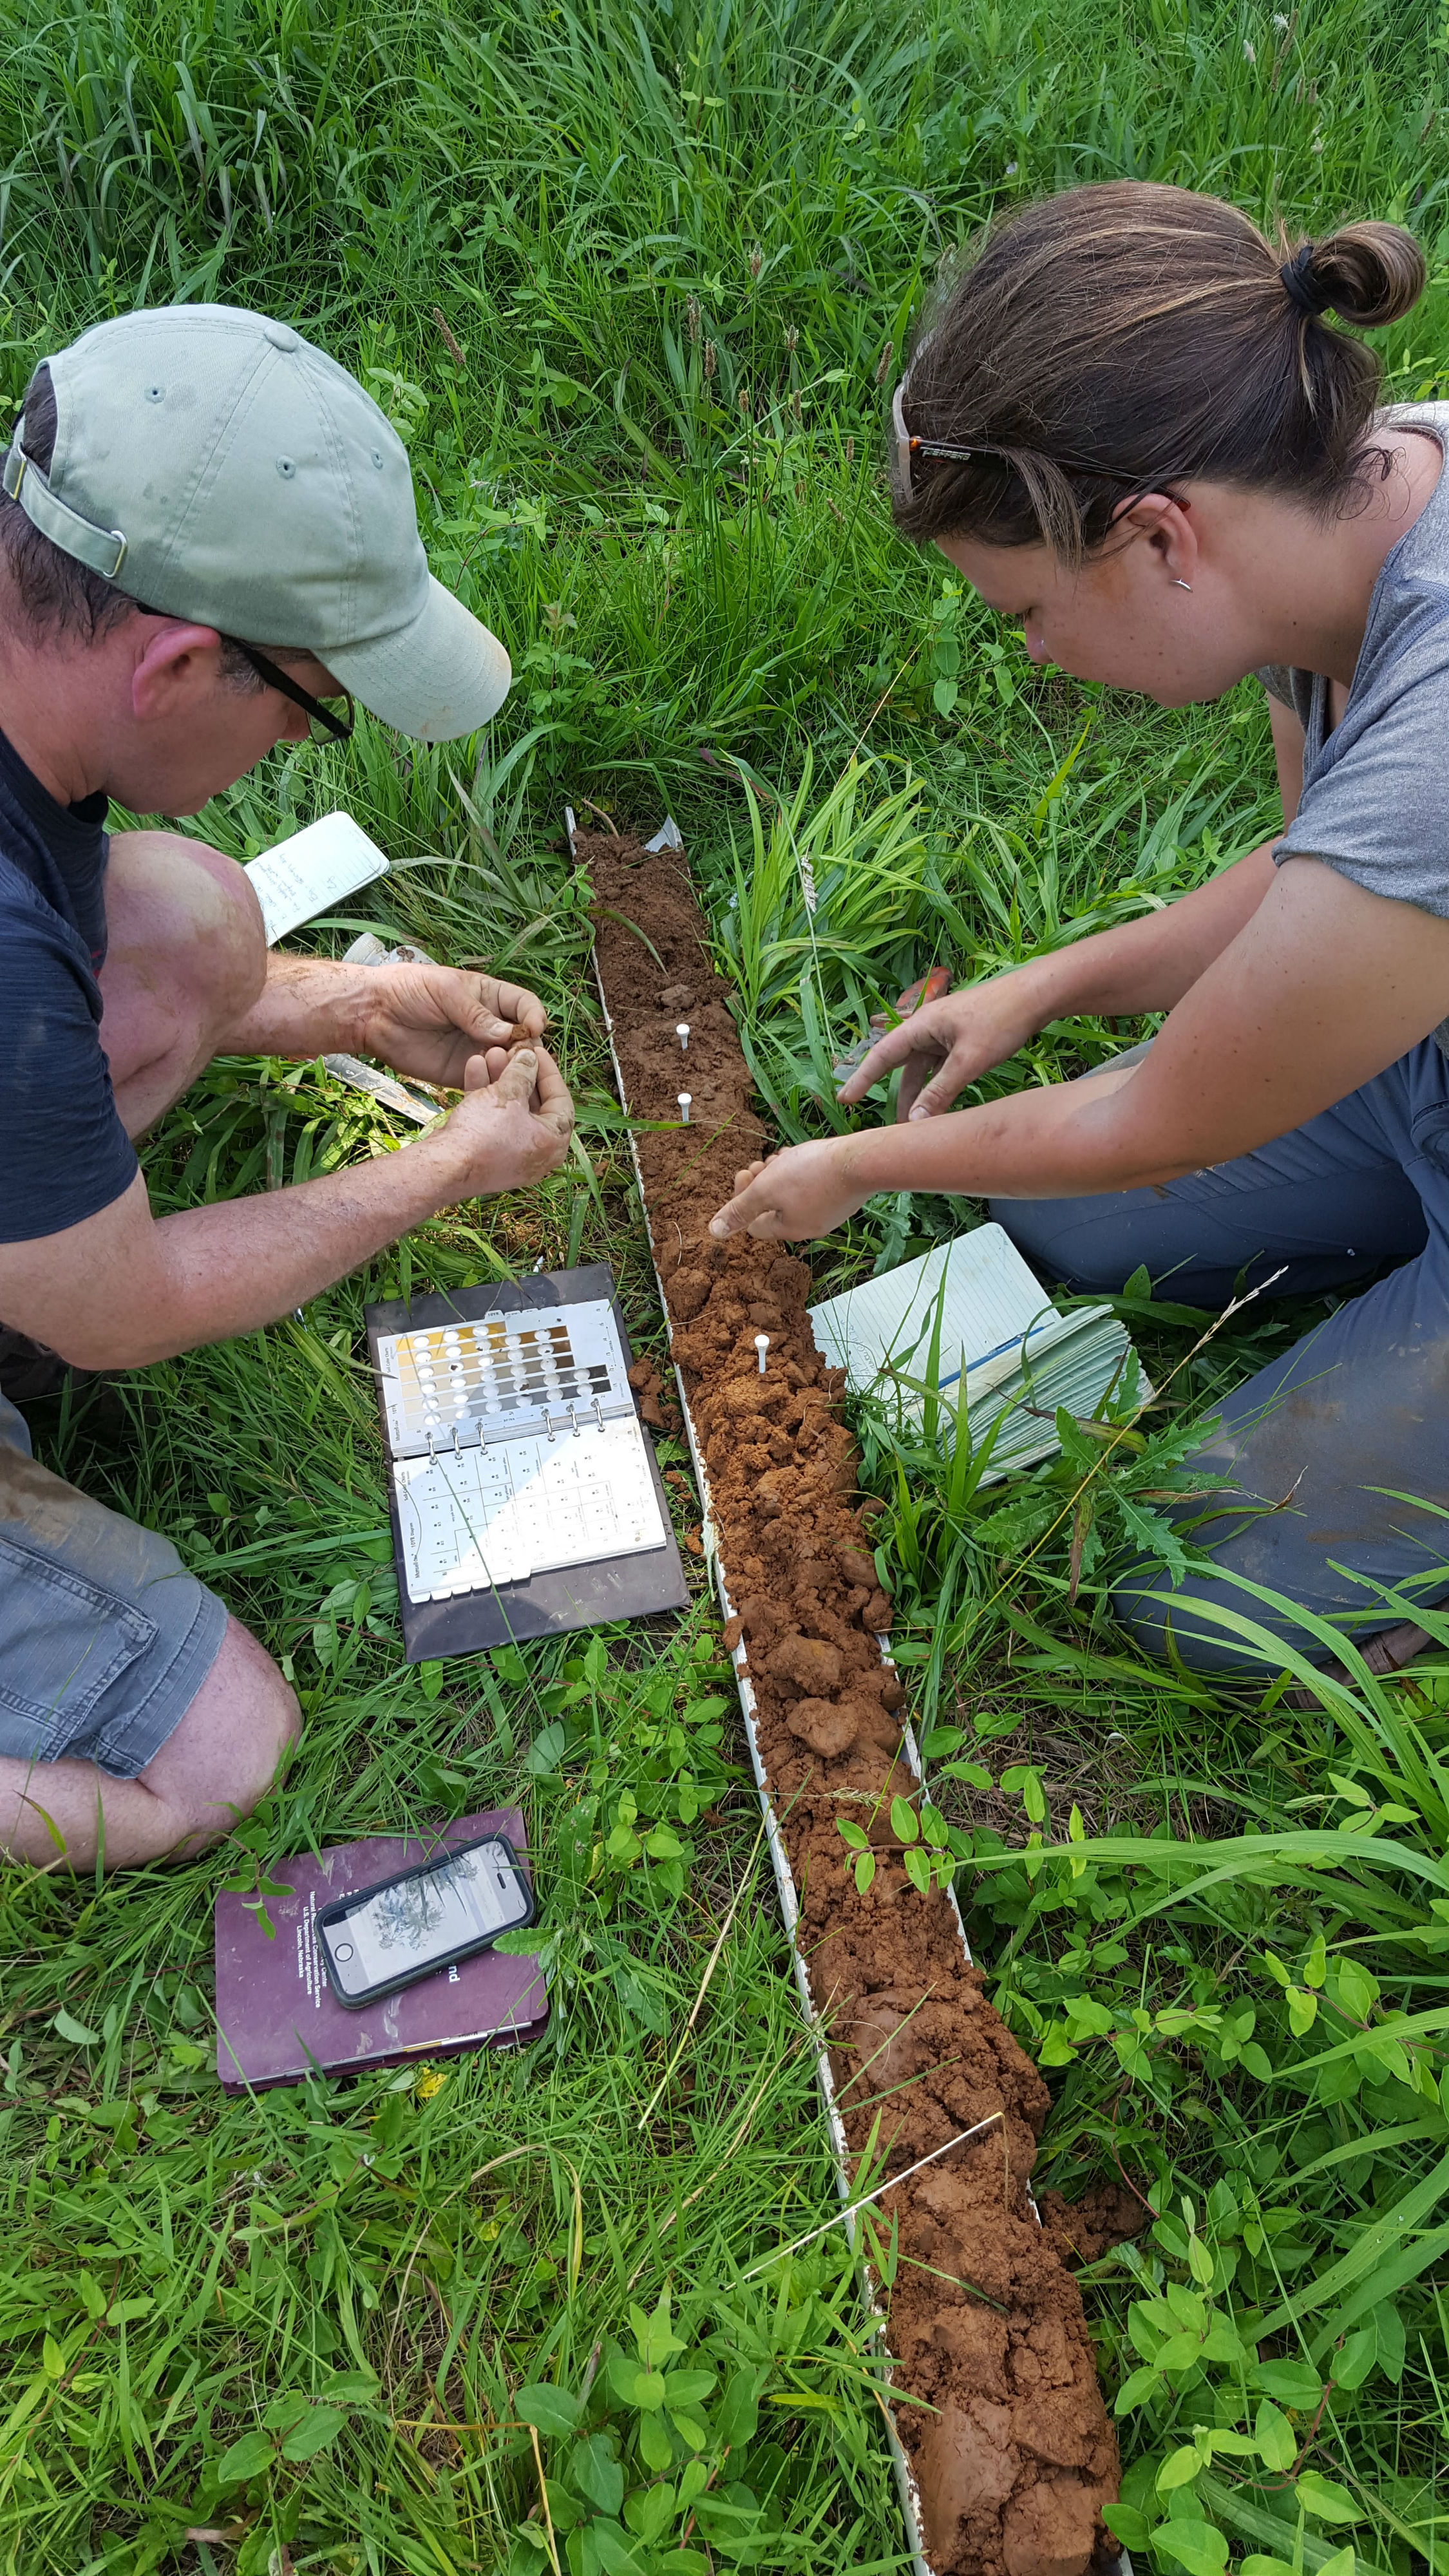 Two students examine a core of soil extracted from the ground